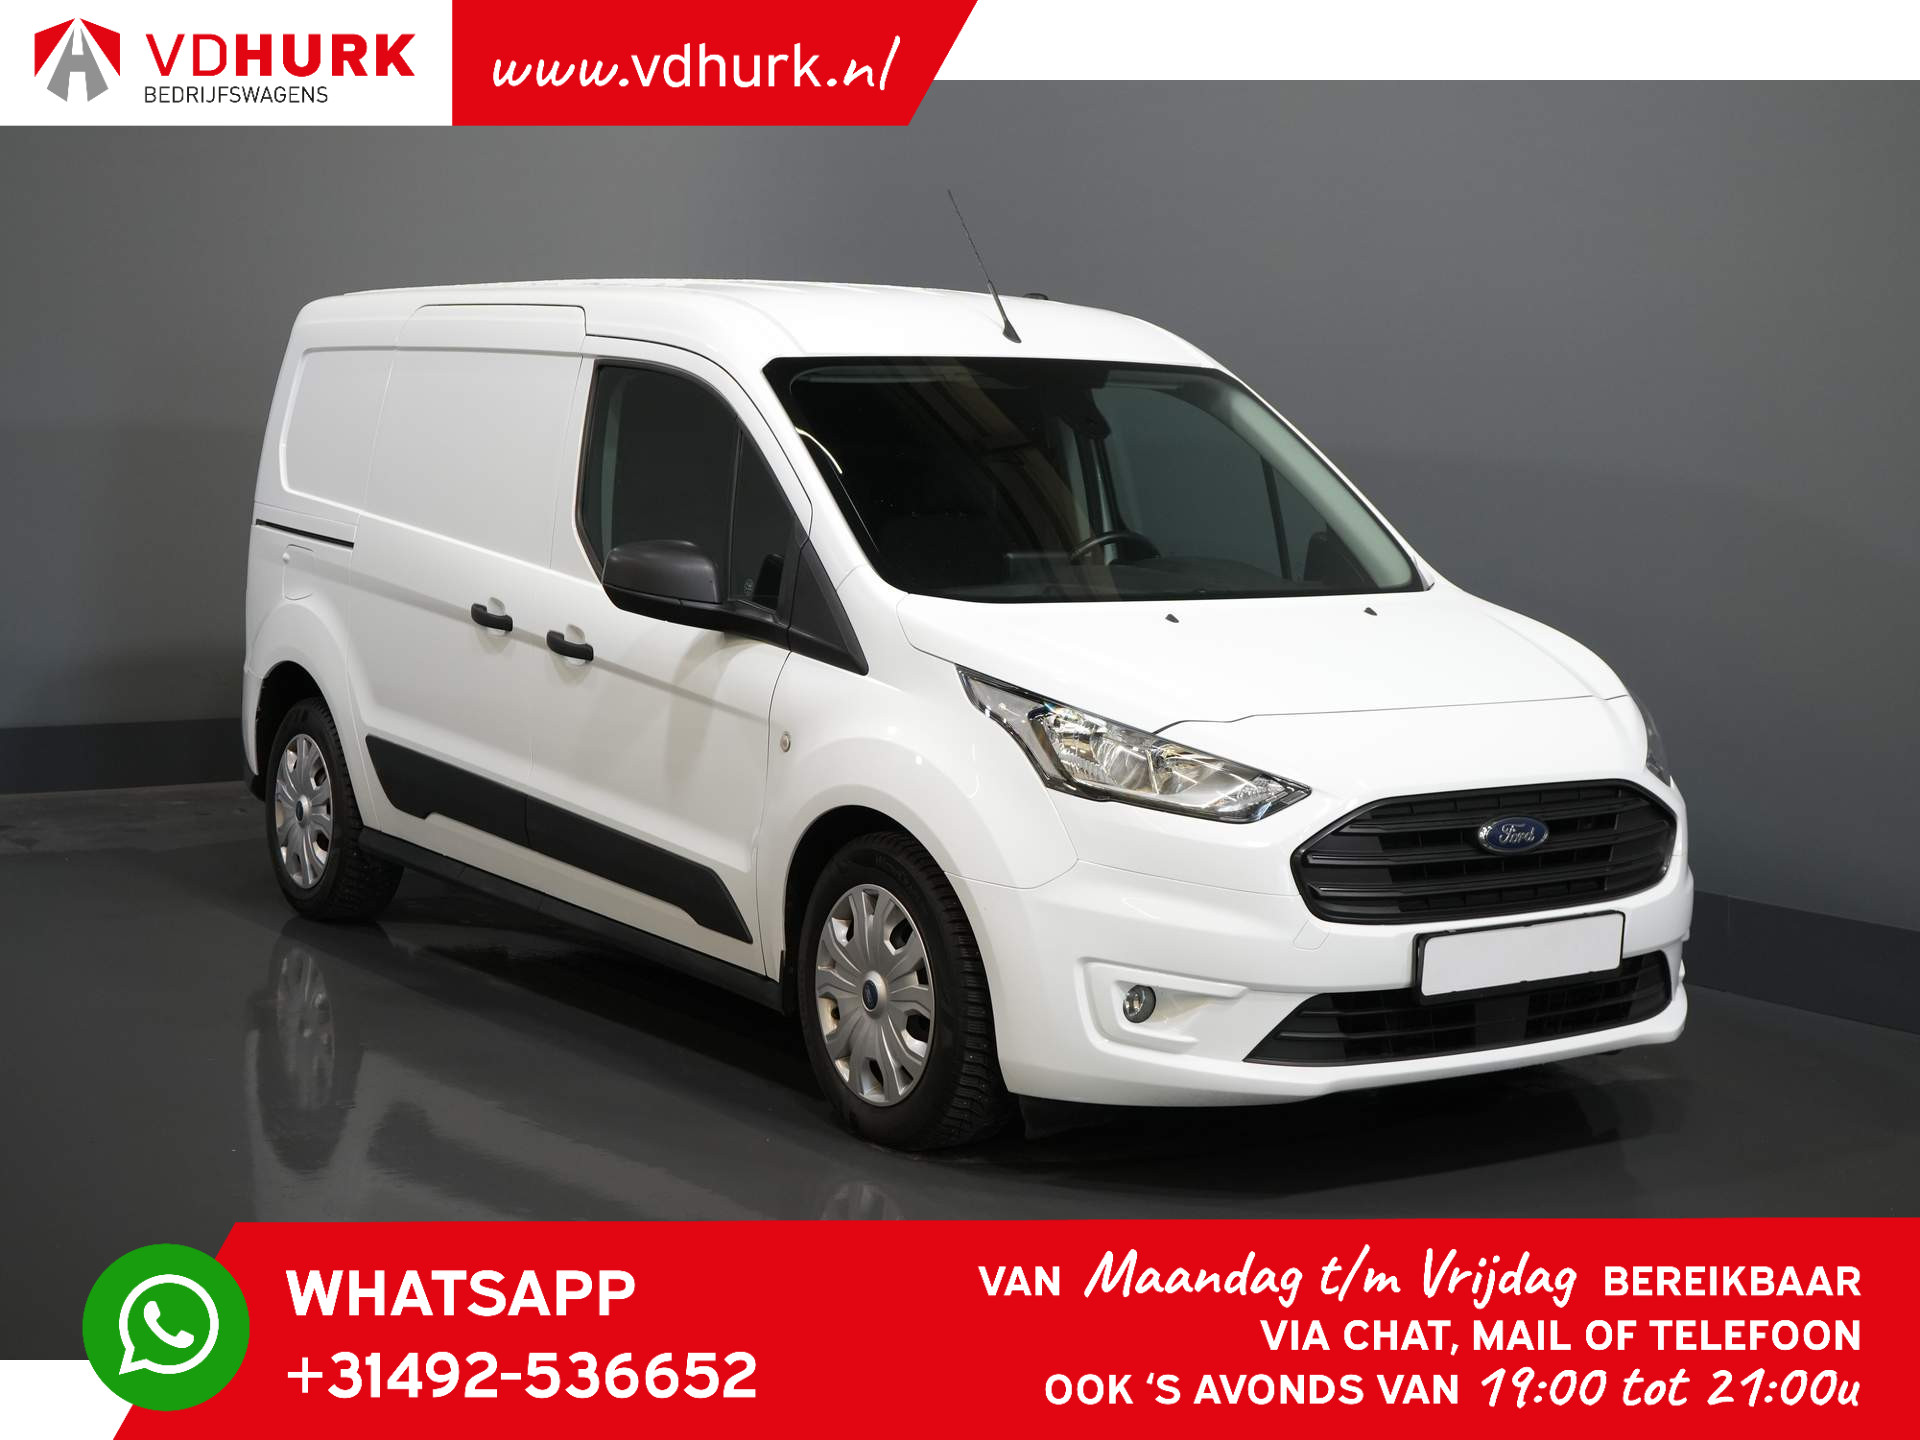 Ford Transit Connect L2 1.5 TDCI 100 Pk Aut. 3pers./ Standkachel/ Stoelverw./ Carplay/ PDC/ Camera/ Cruise/ Airco